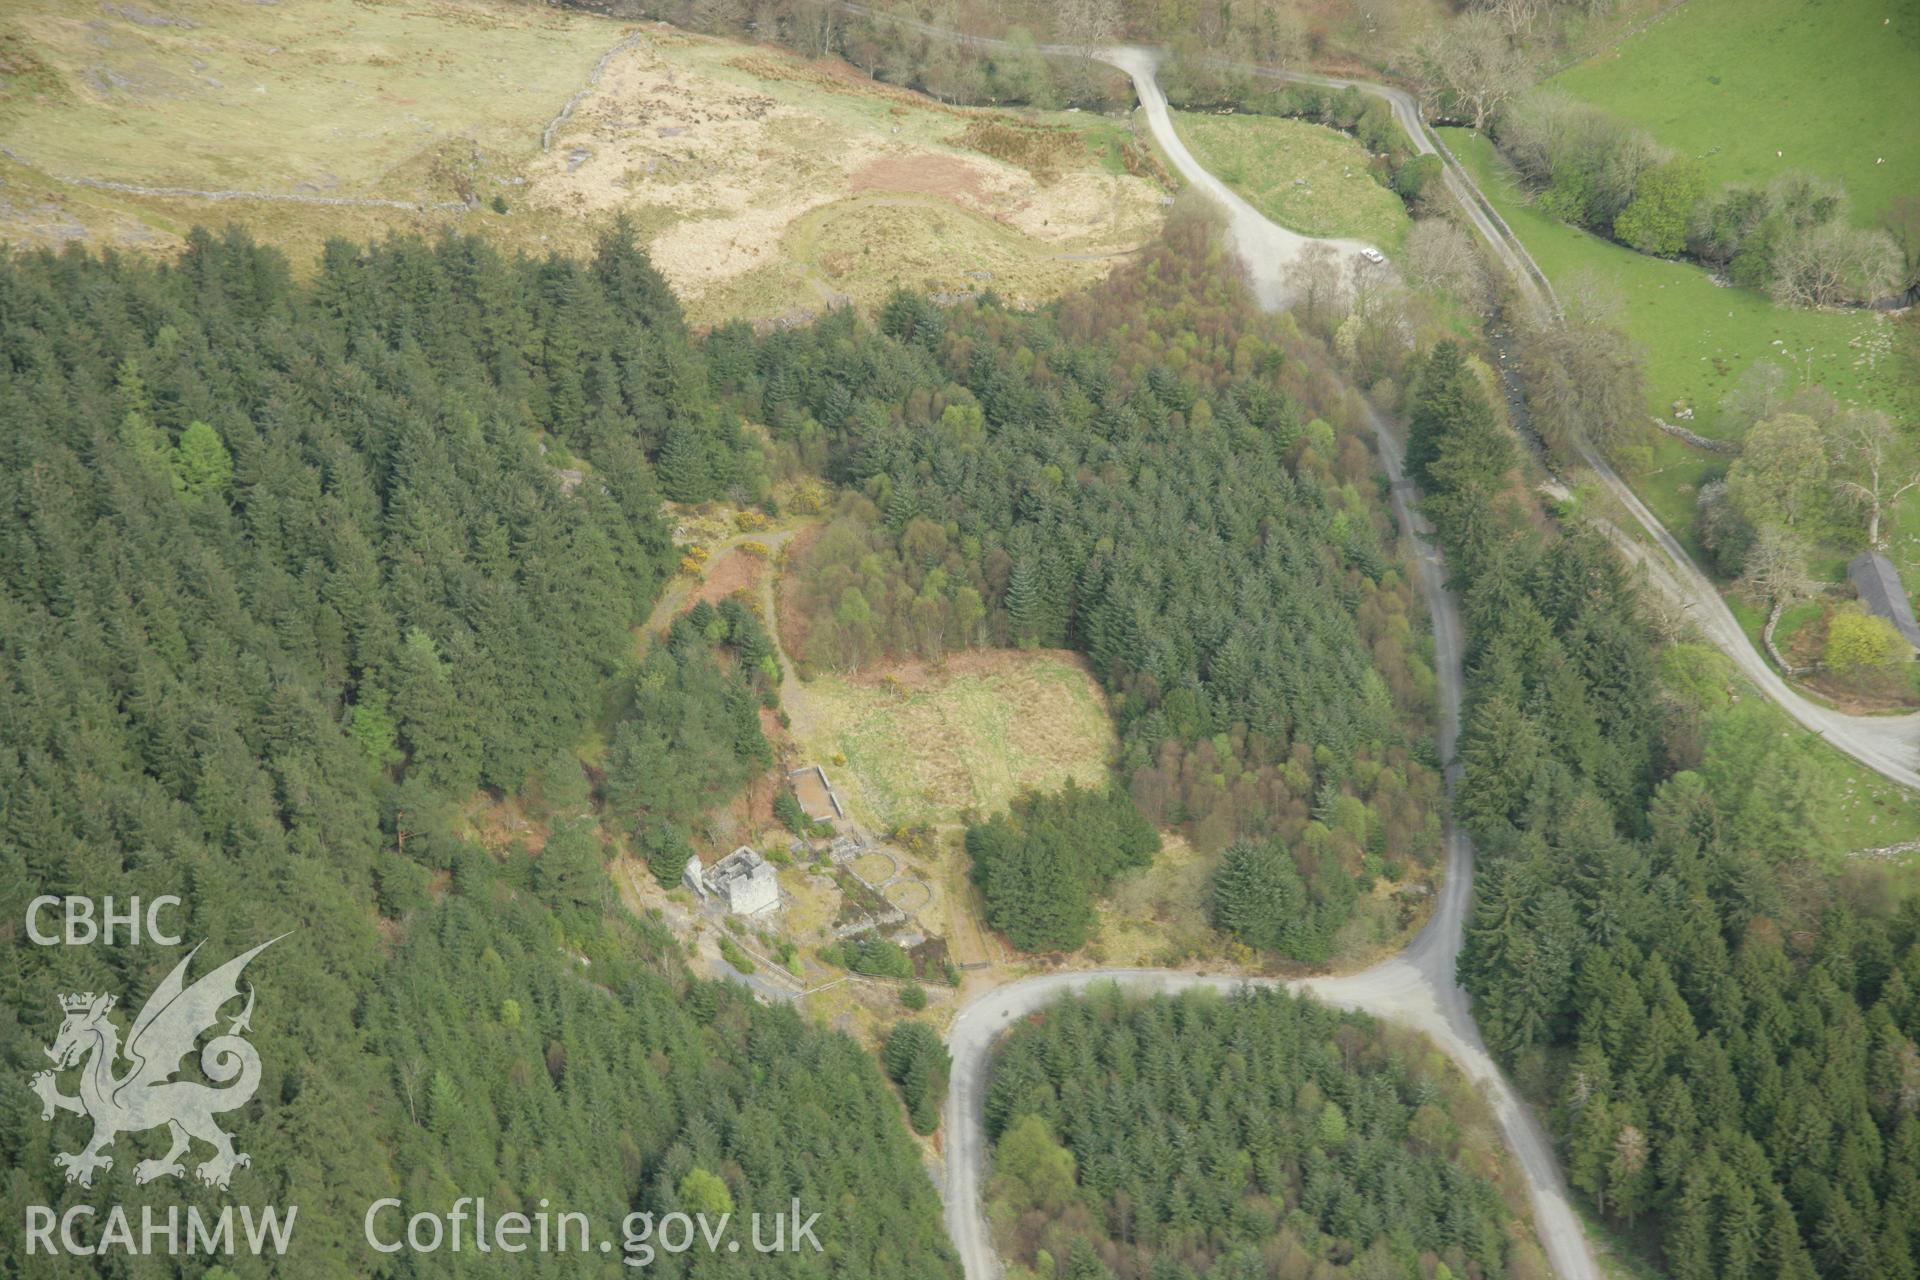 RCAHMW colour oblique aerial photograph of Ystrad Einion Lead Mine. Taken on 17 April 2007 by Toby Driver